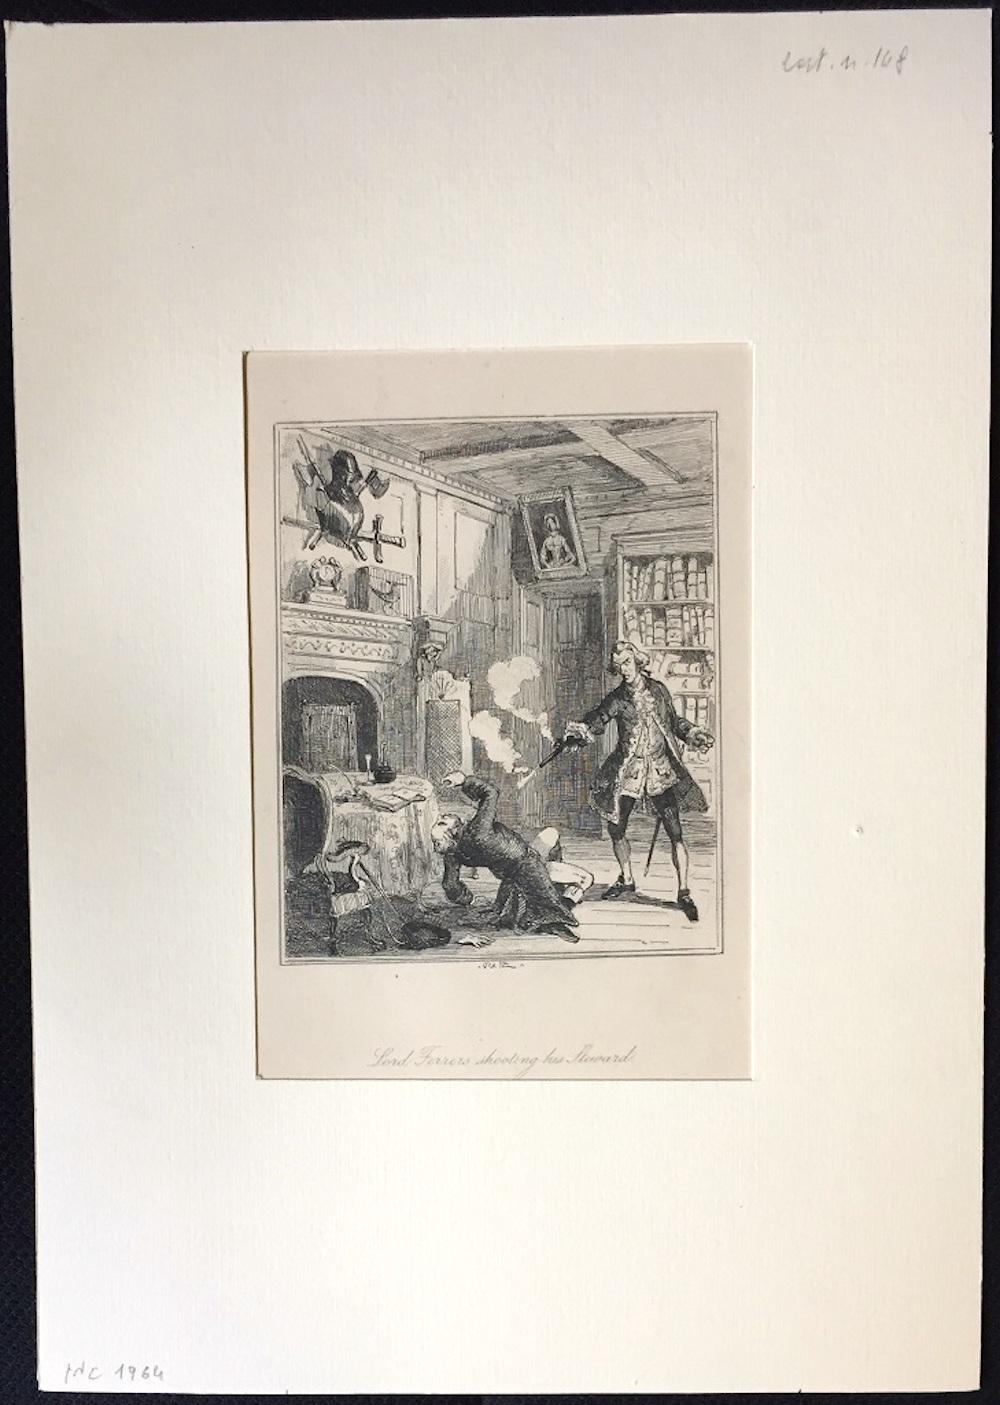 Lord Ferrers shooting his Steward - Original Etching by PHIZ - Mid 19th Century  - Print by Browne Hablot Knight 